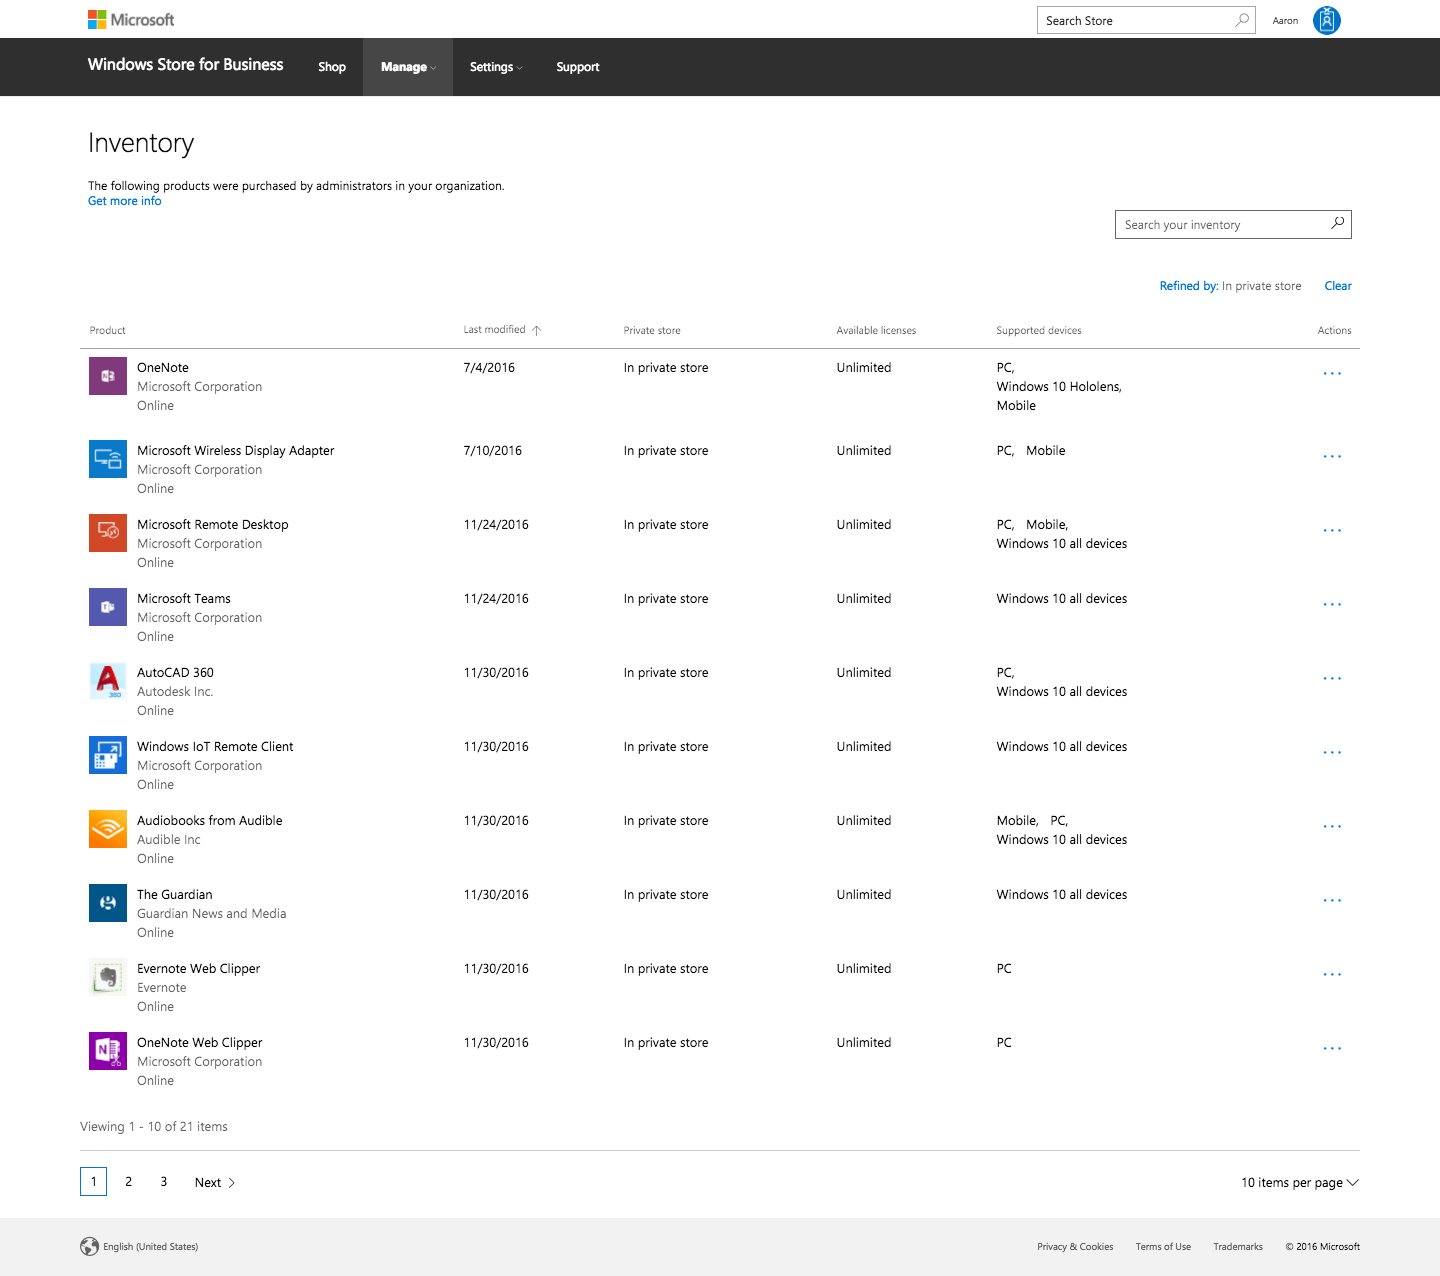 Filtering on apps in the Private store in the Windows Store for Business